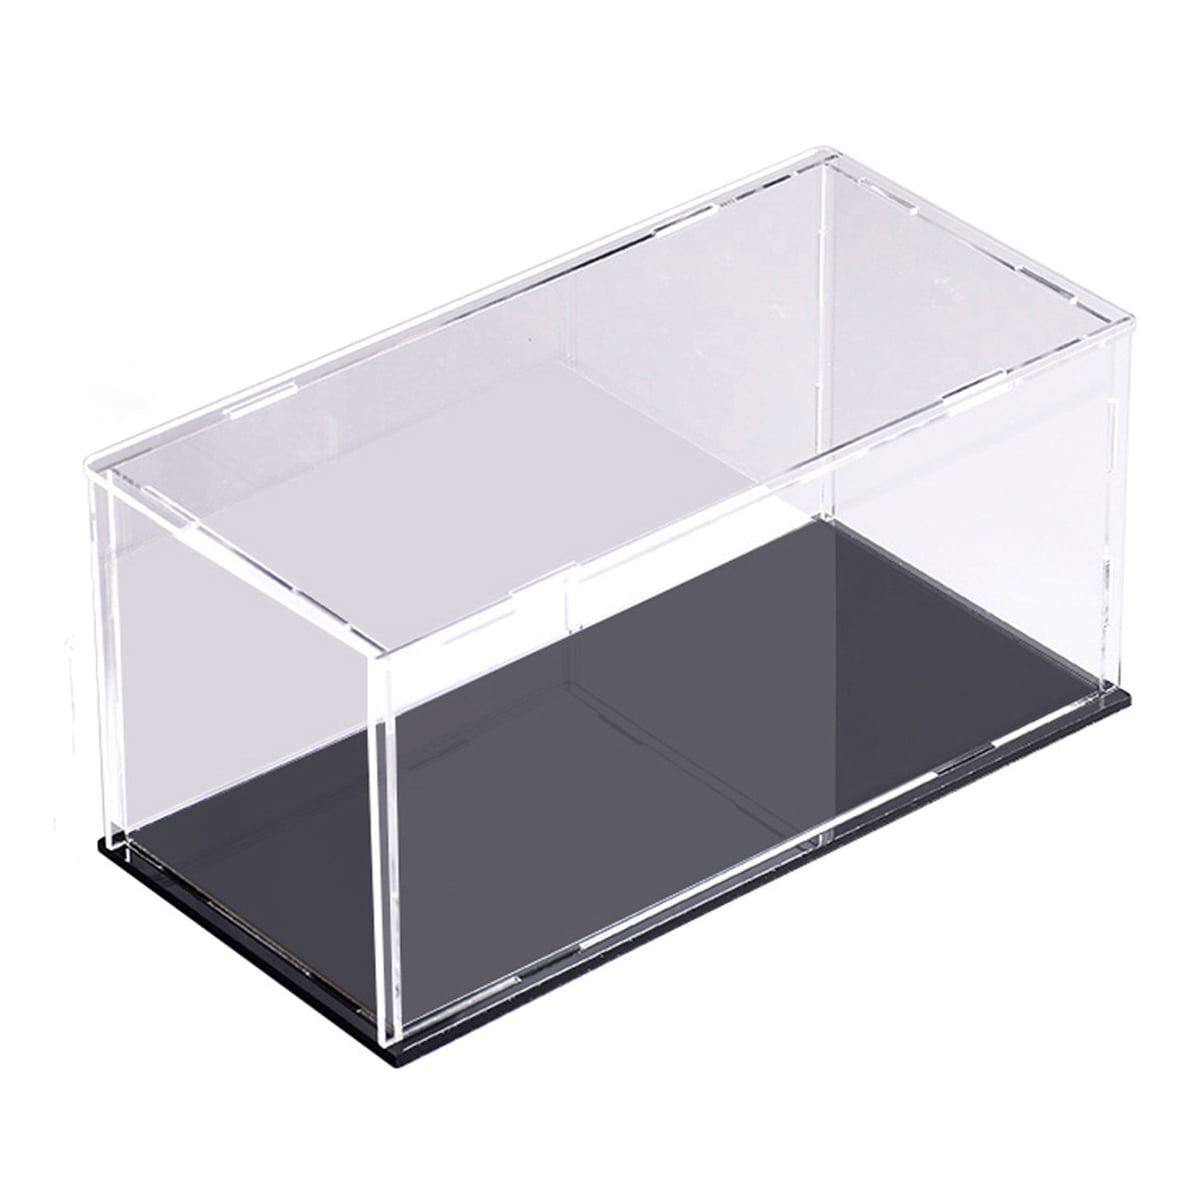 Dustproof Acrylic Display Cases Toys Model Protective Storage Case Container 